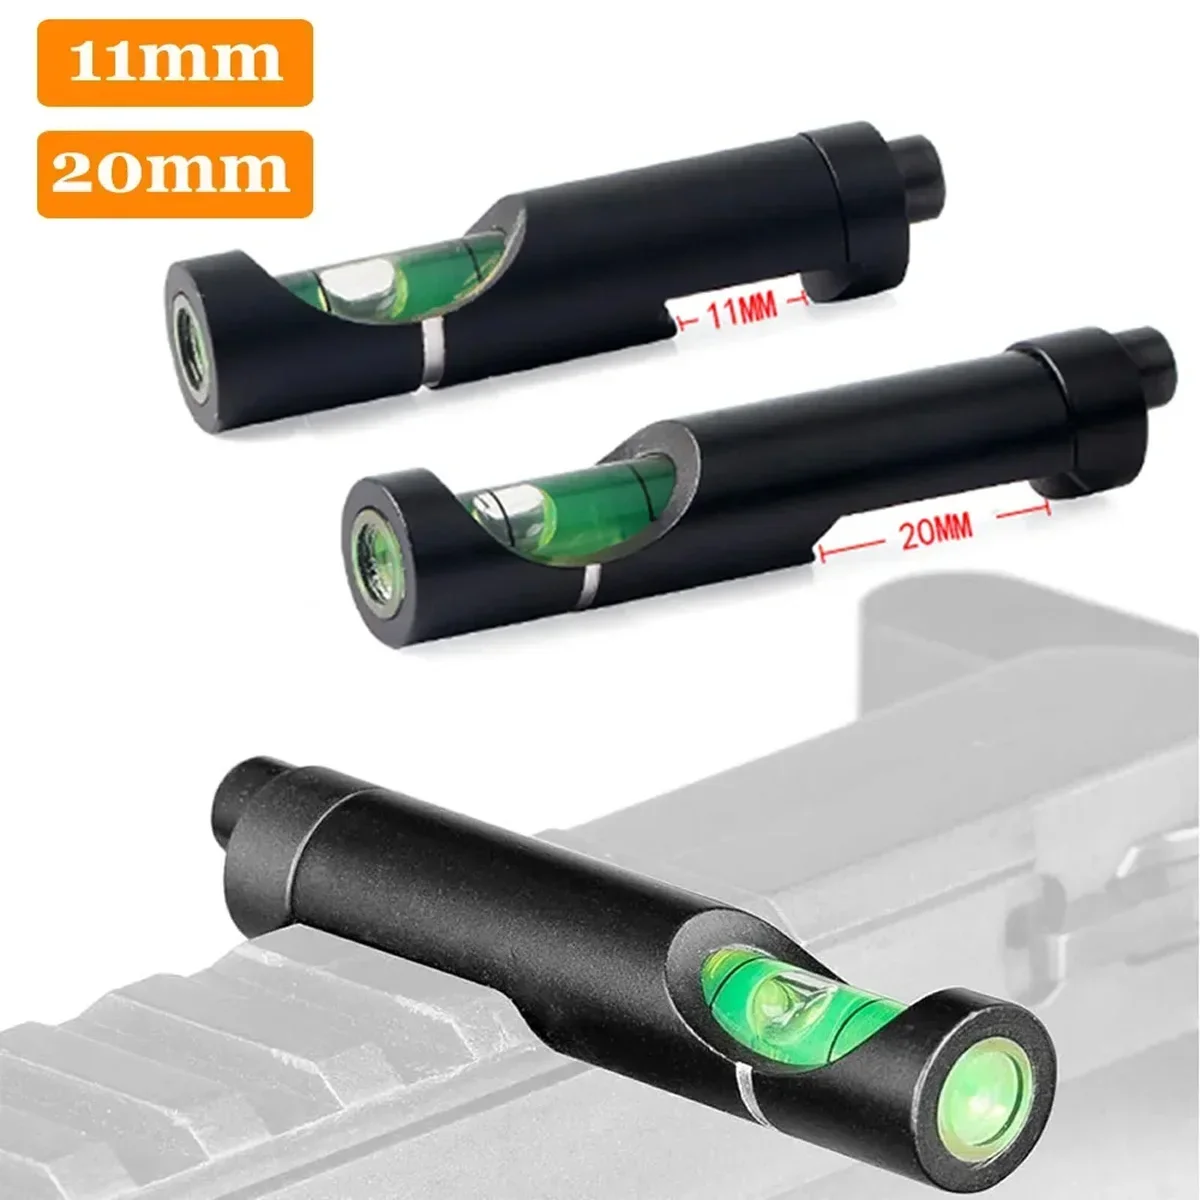 Hunting Spirit Bubble Level Optical Scope Mounts for 11mm/20mm Picatinny Rail Rifel Scope Leveling Tool Kit Hunting Accessories